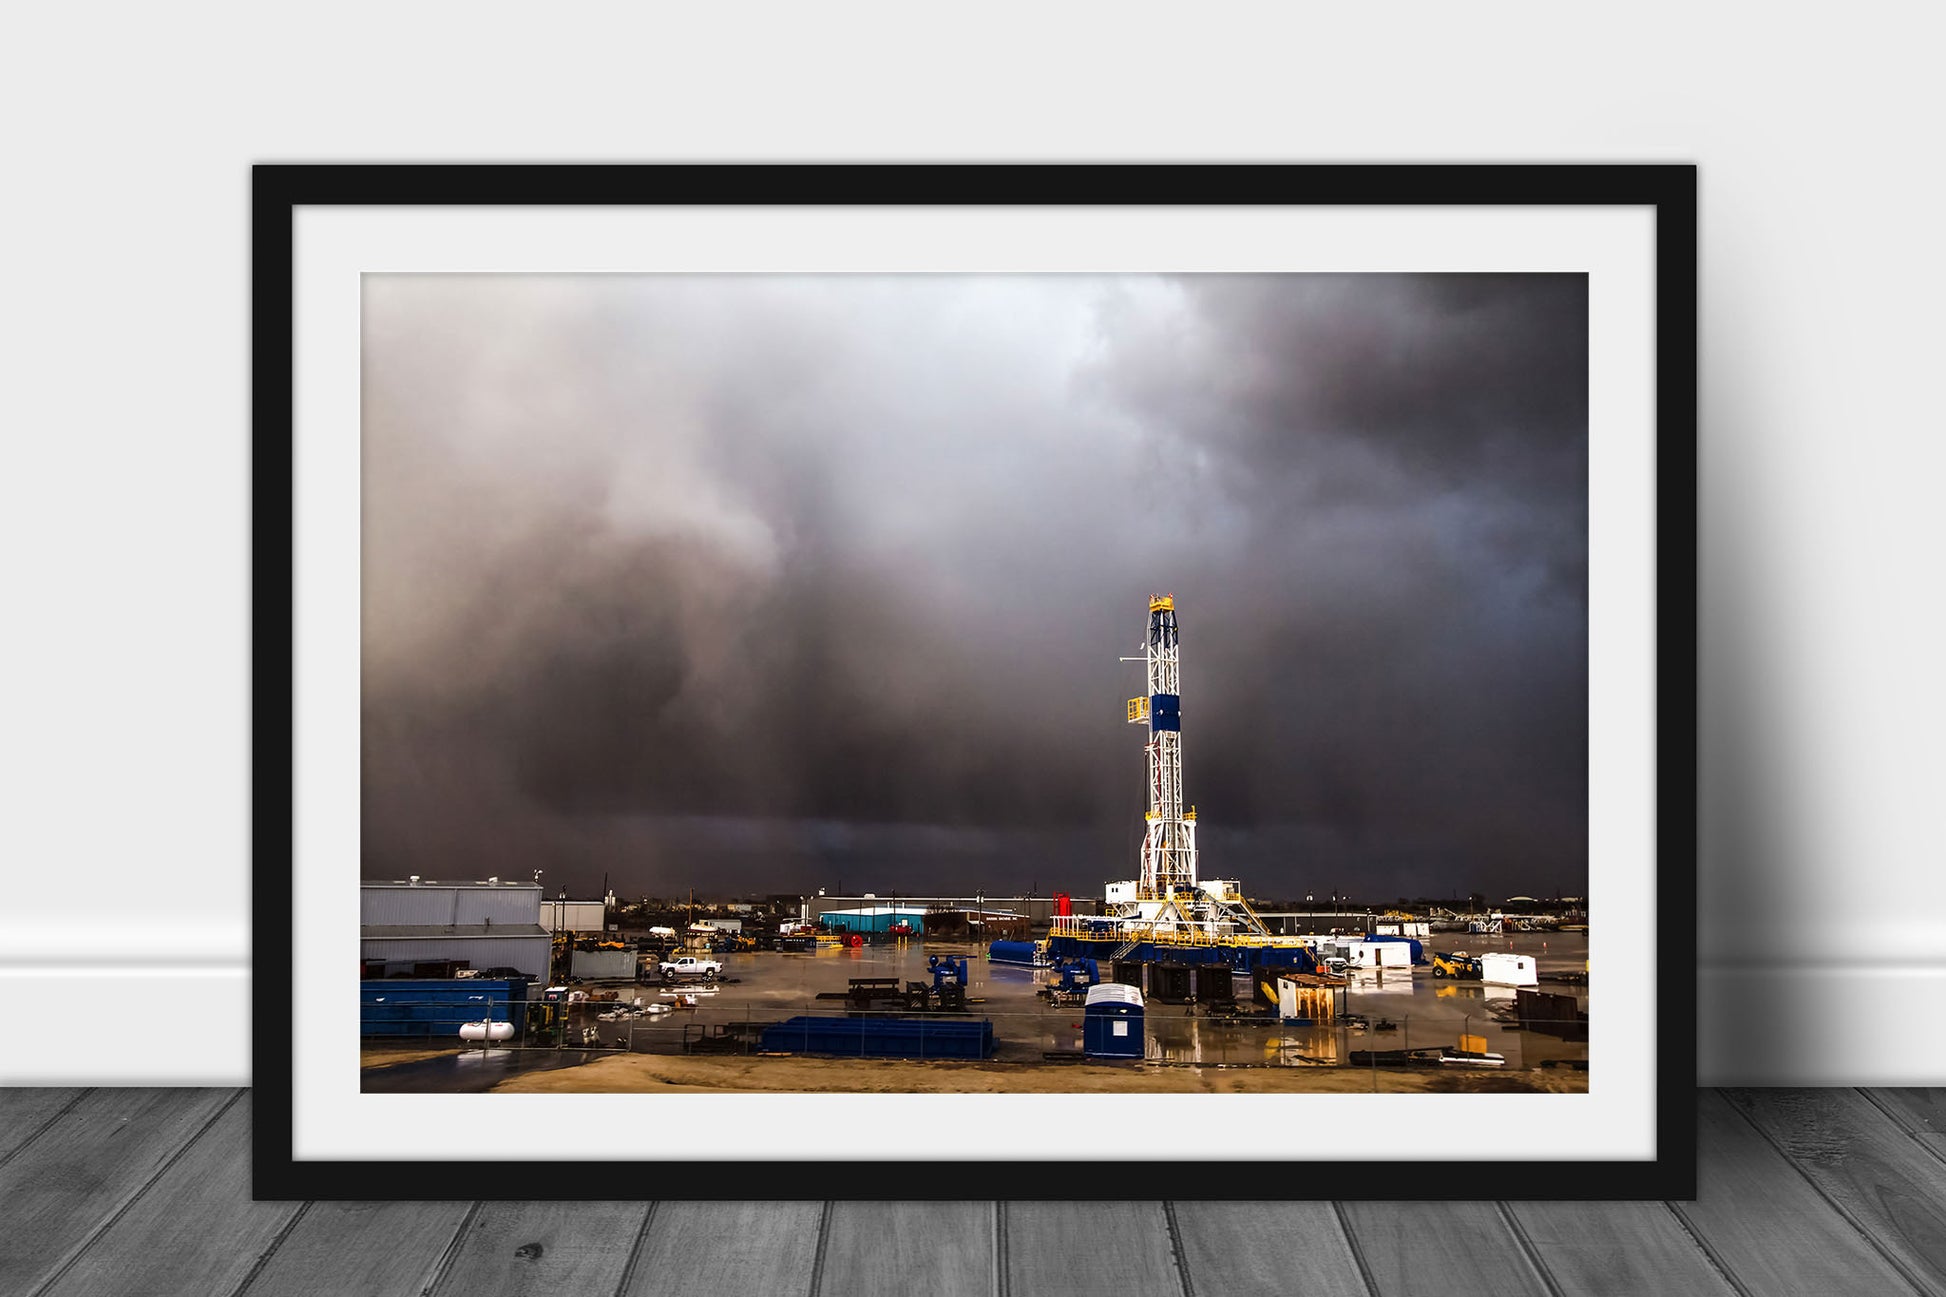 Framed and matted oilfield print of a drilling rig derrick standing tall as an intense storm passes by on a stormy spring day in Oklahoma by Sean Ramsey of Southern Plains Photography.